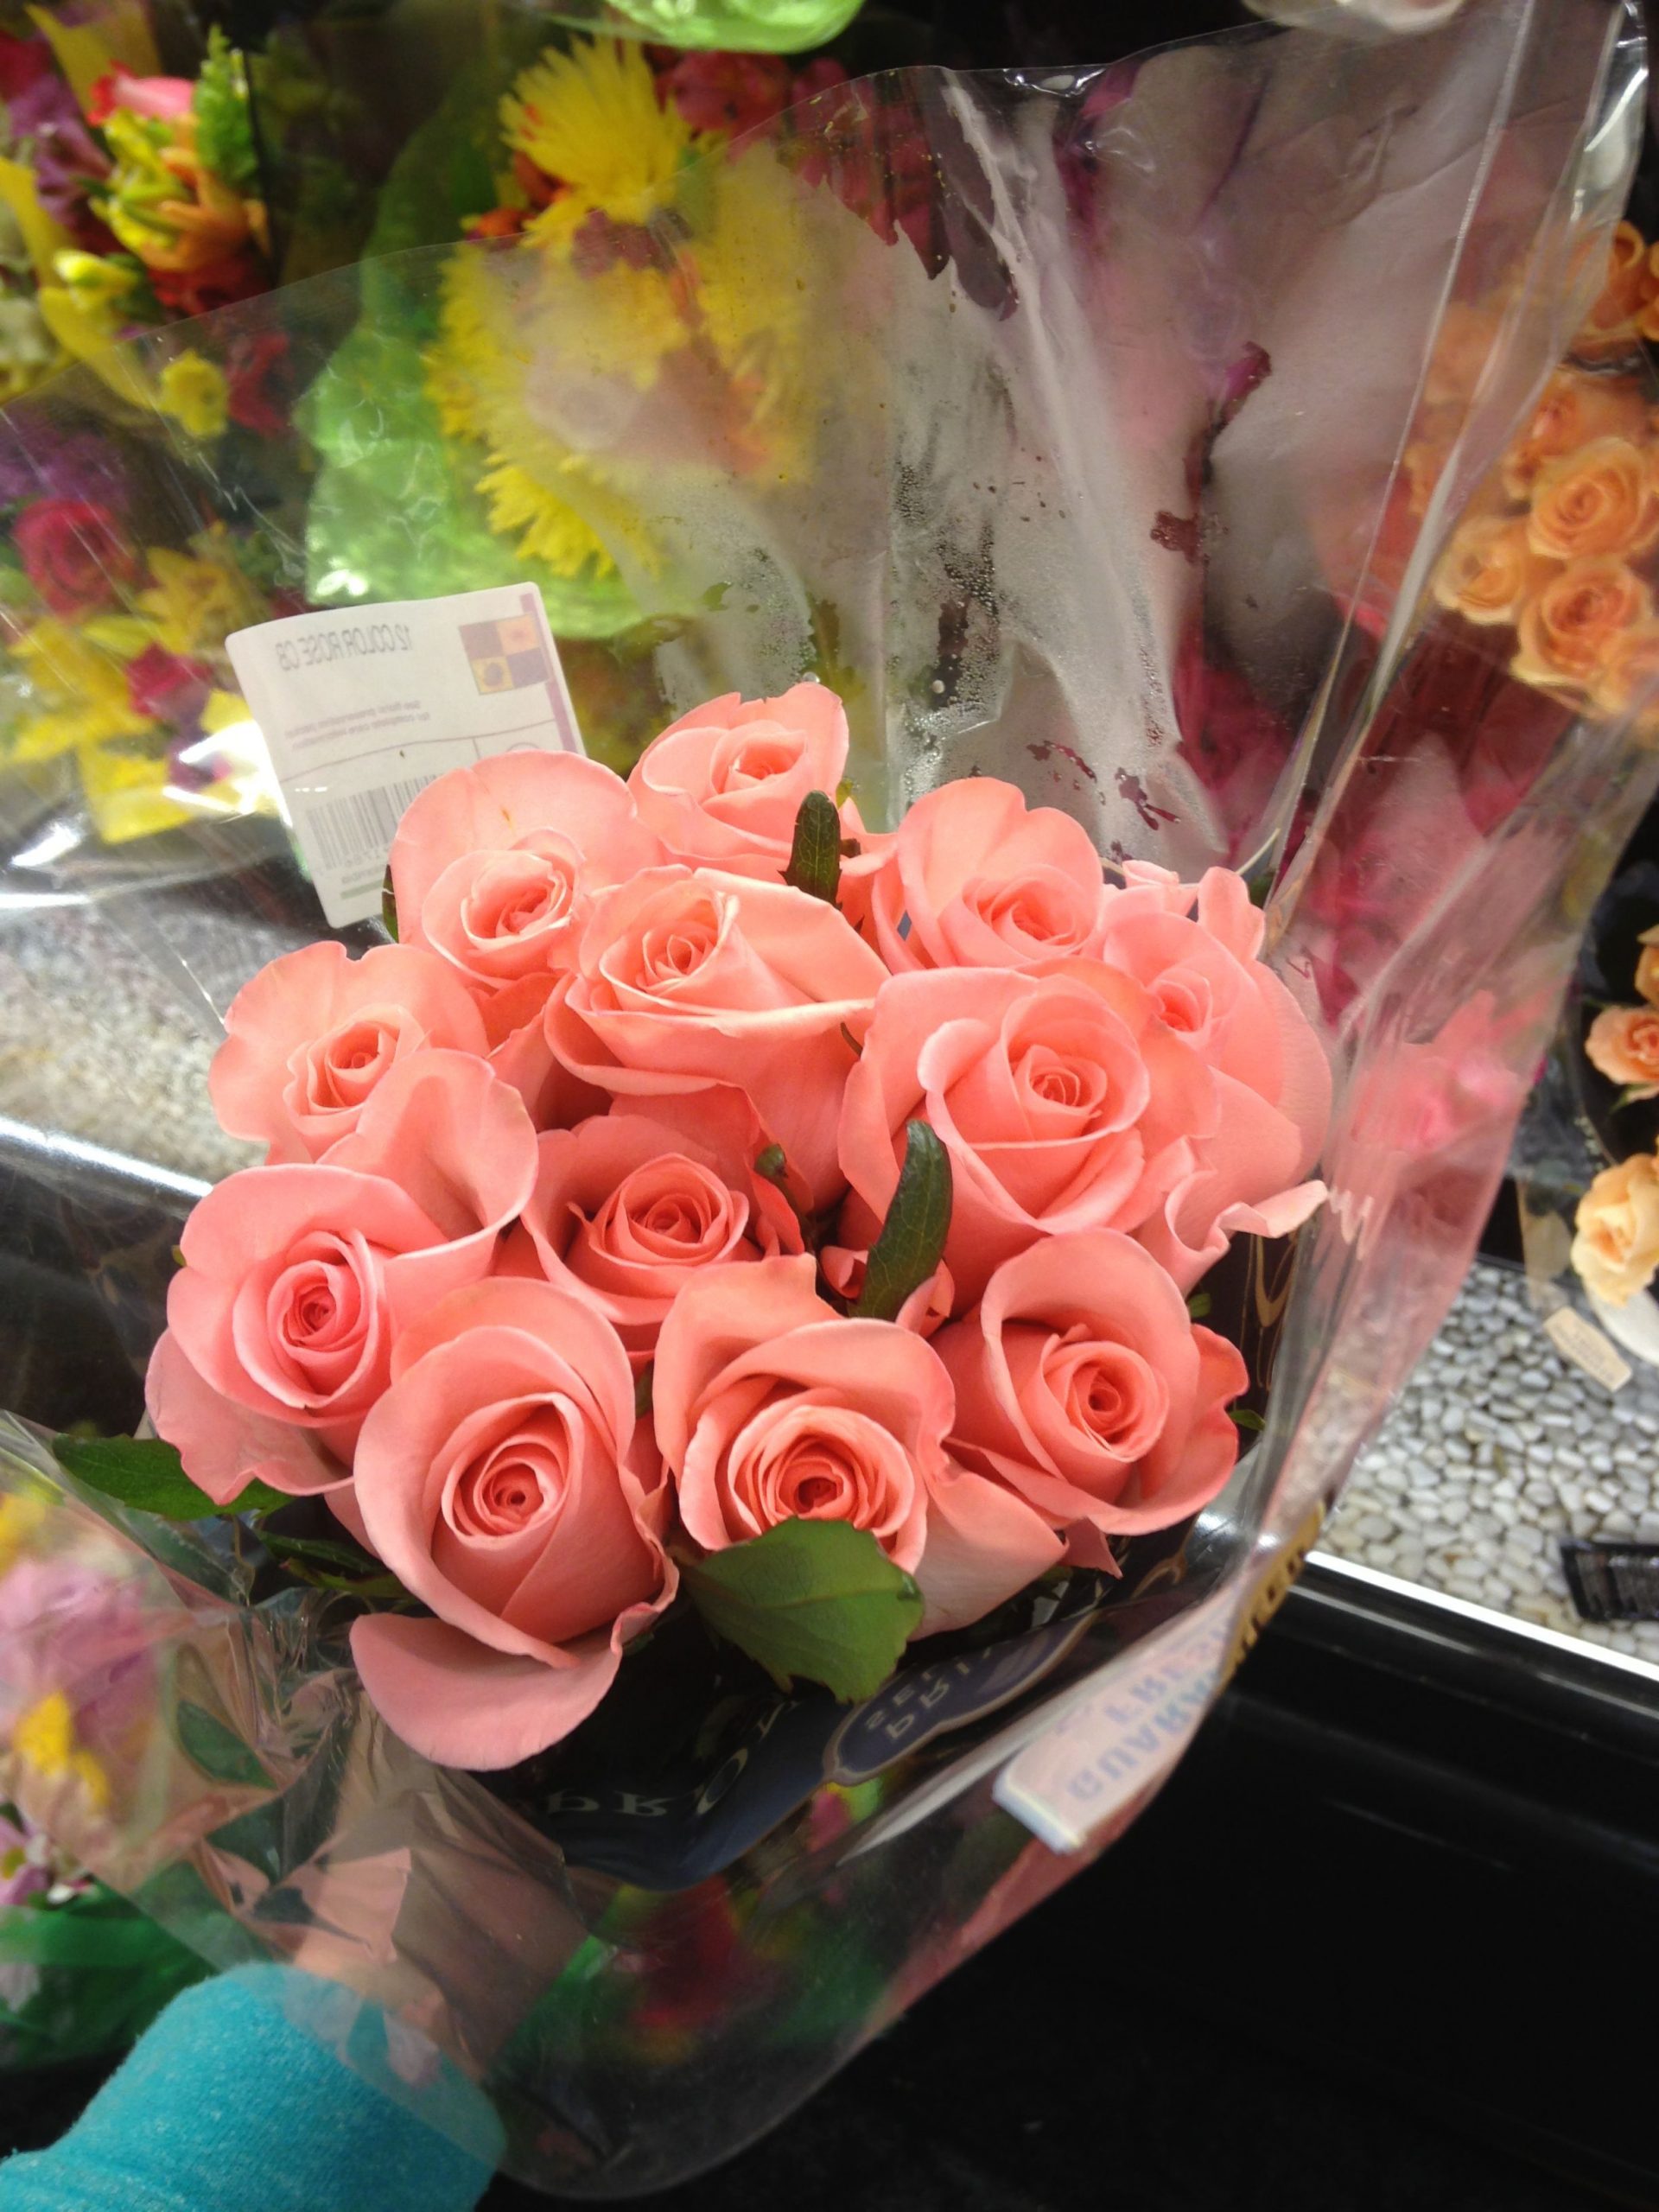 Kroger Roses All Flowers Flowers Love Flowers for dimensions 2448 X 3264